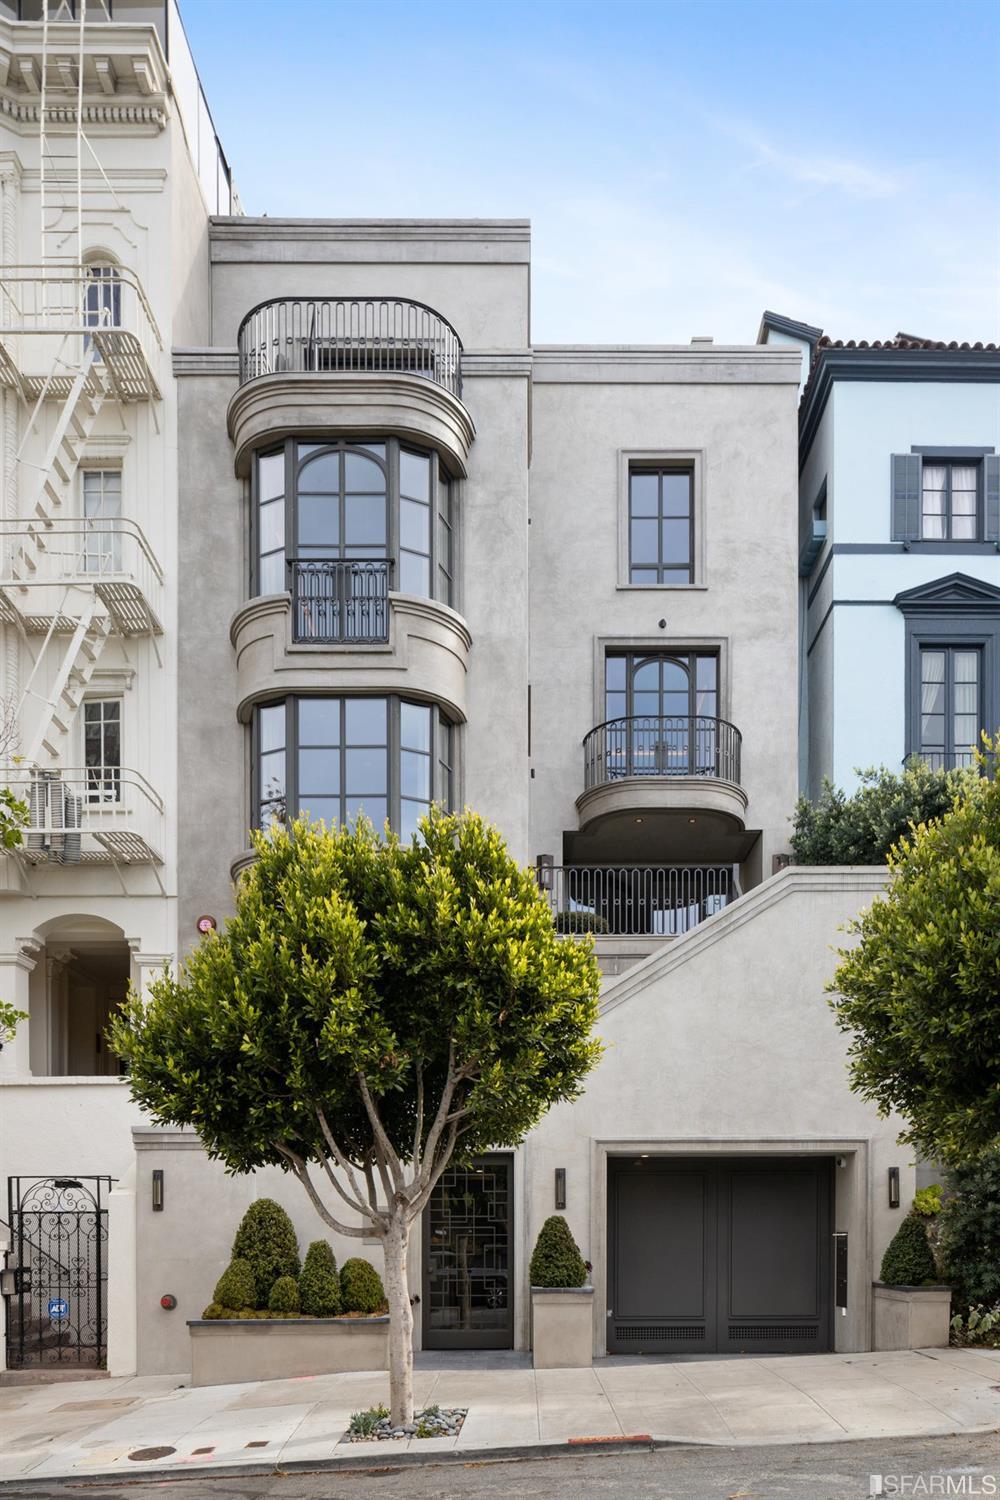 Magnificent Russian Hill residence with incredible architecture and design plus gorgeous city & Bay views. 5+ bedrooms (including separate guest apt), 5.5+ bathrooms, media room, family room, game room, elevator, roofdeck, beautiful garden and more. 5+ car parking.